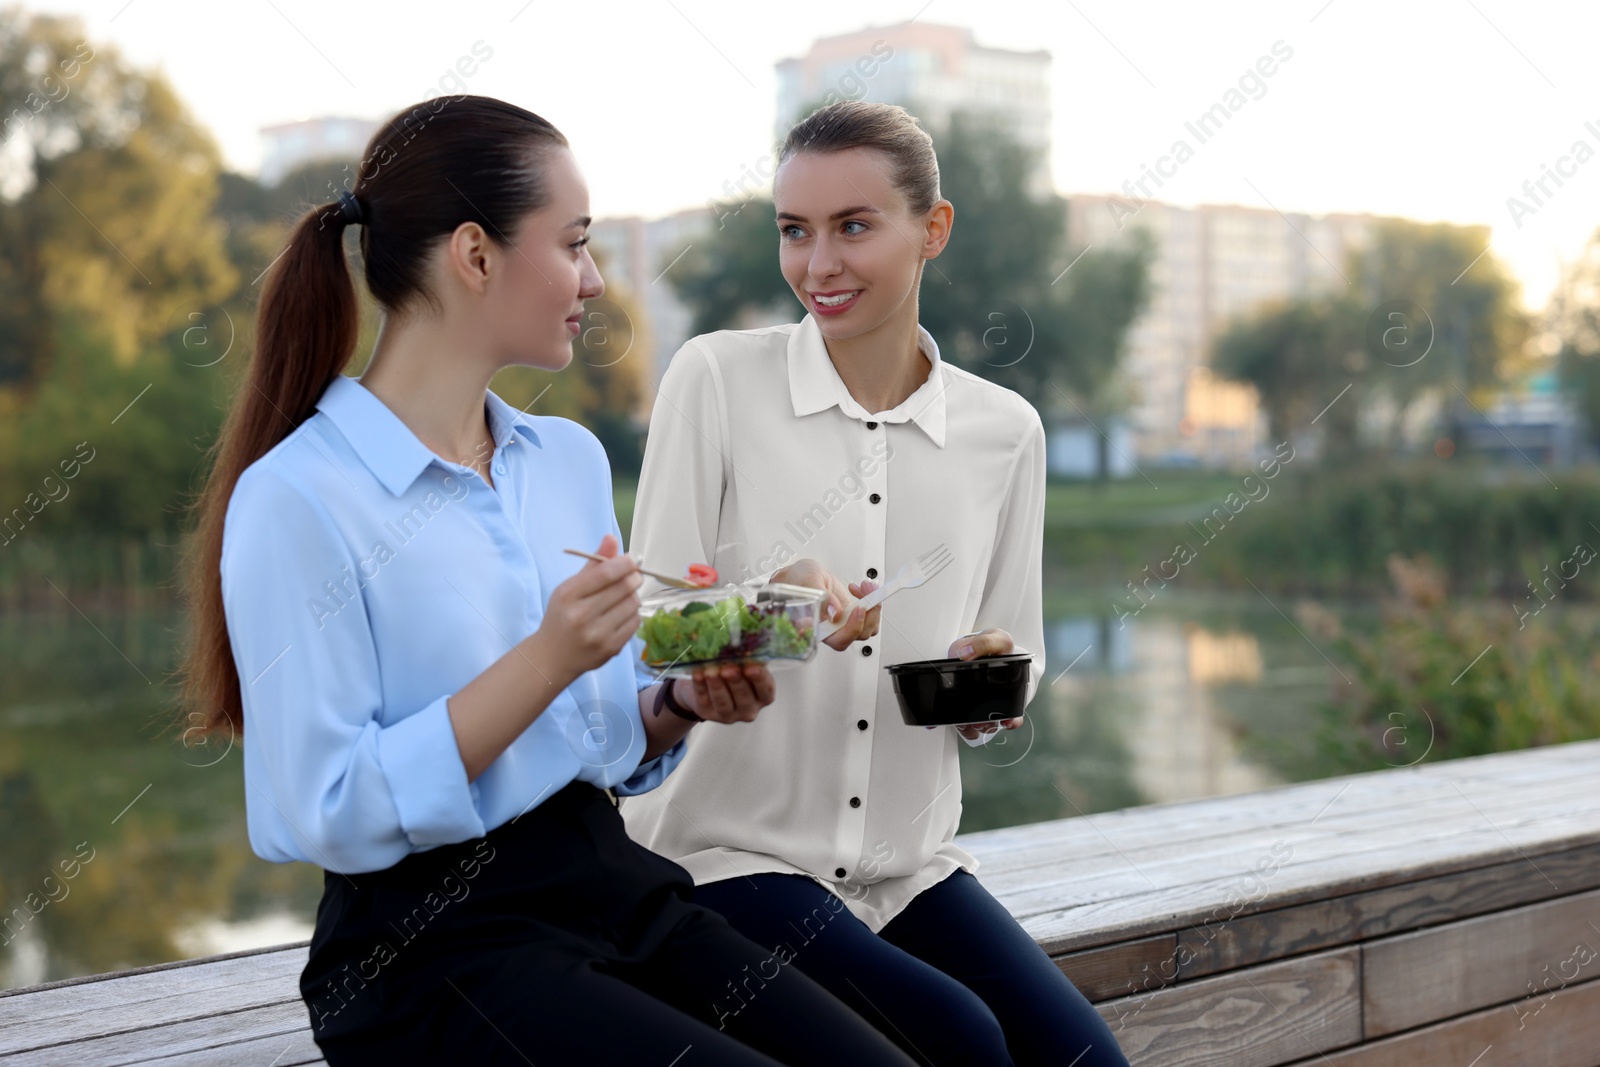 Photo of Smiling business woman talking with her colleague during lunch outdoors